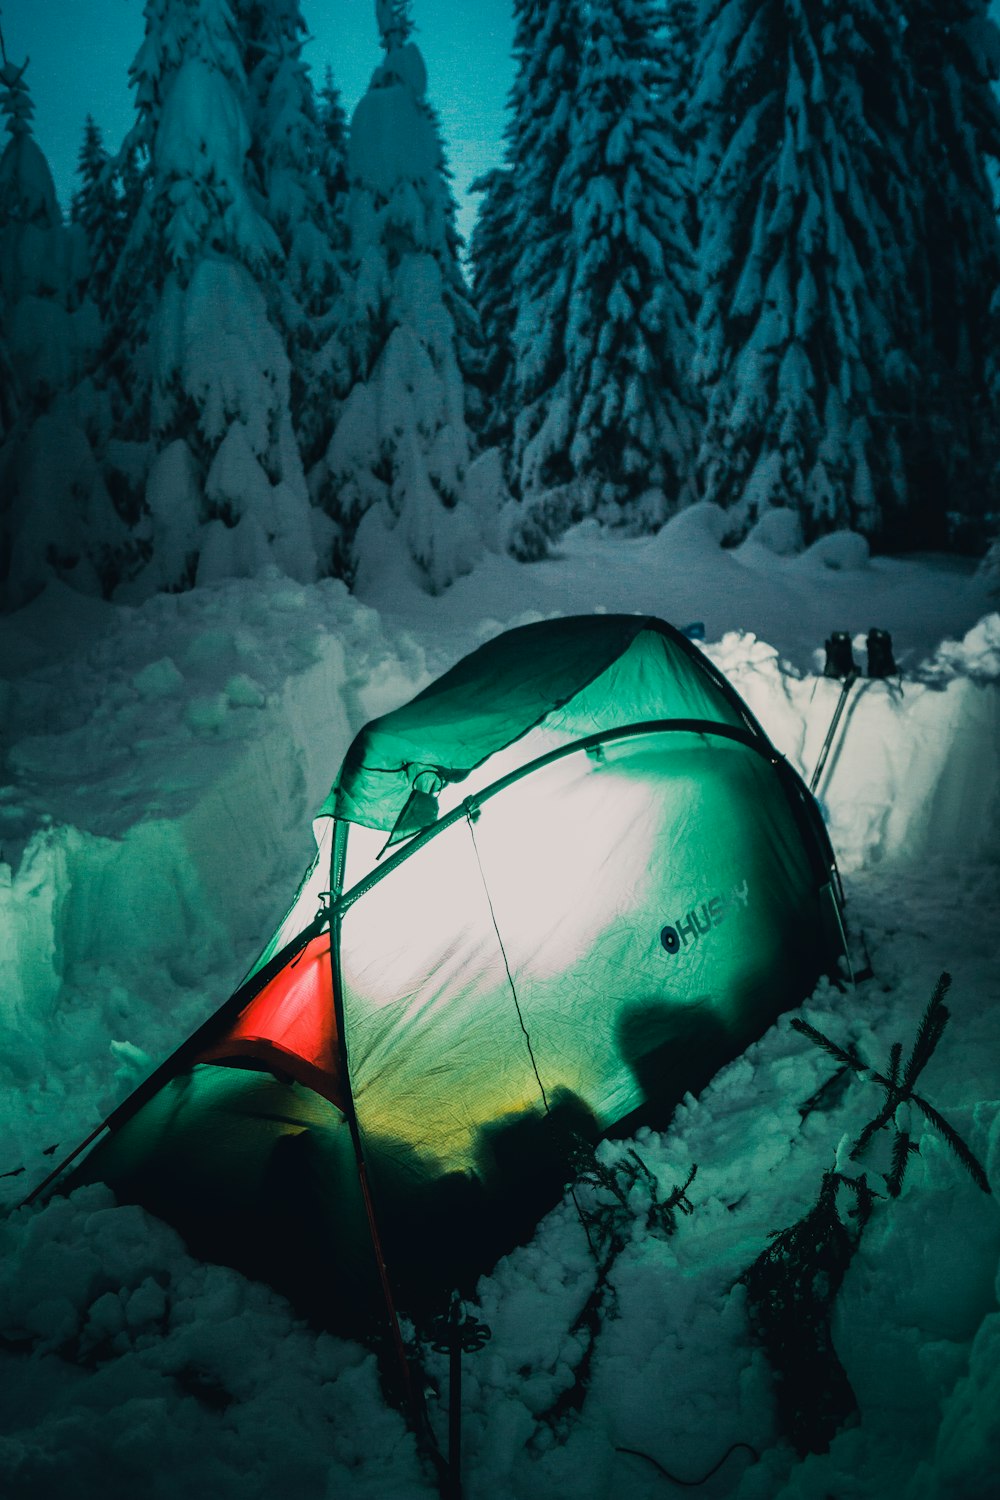 green tent near pine trees during winter